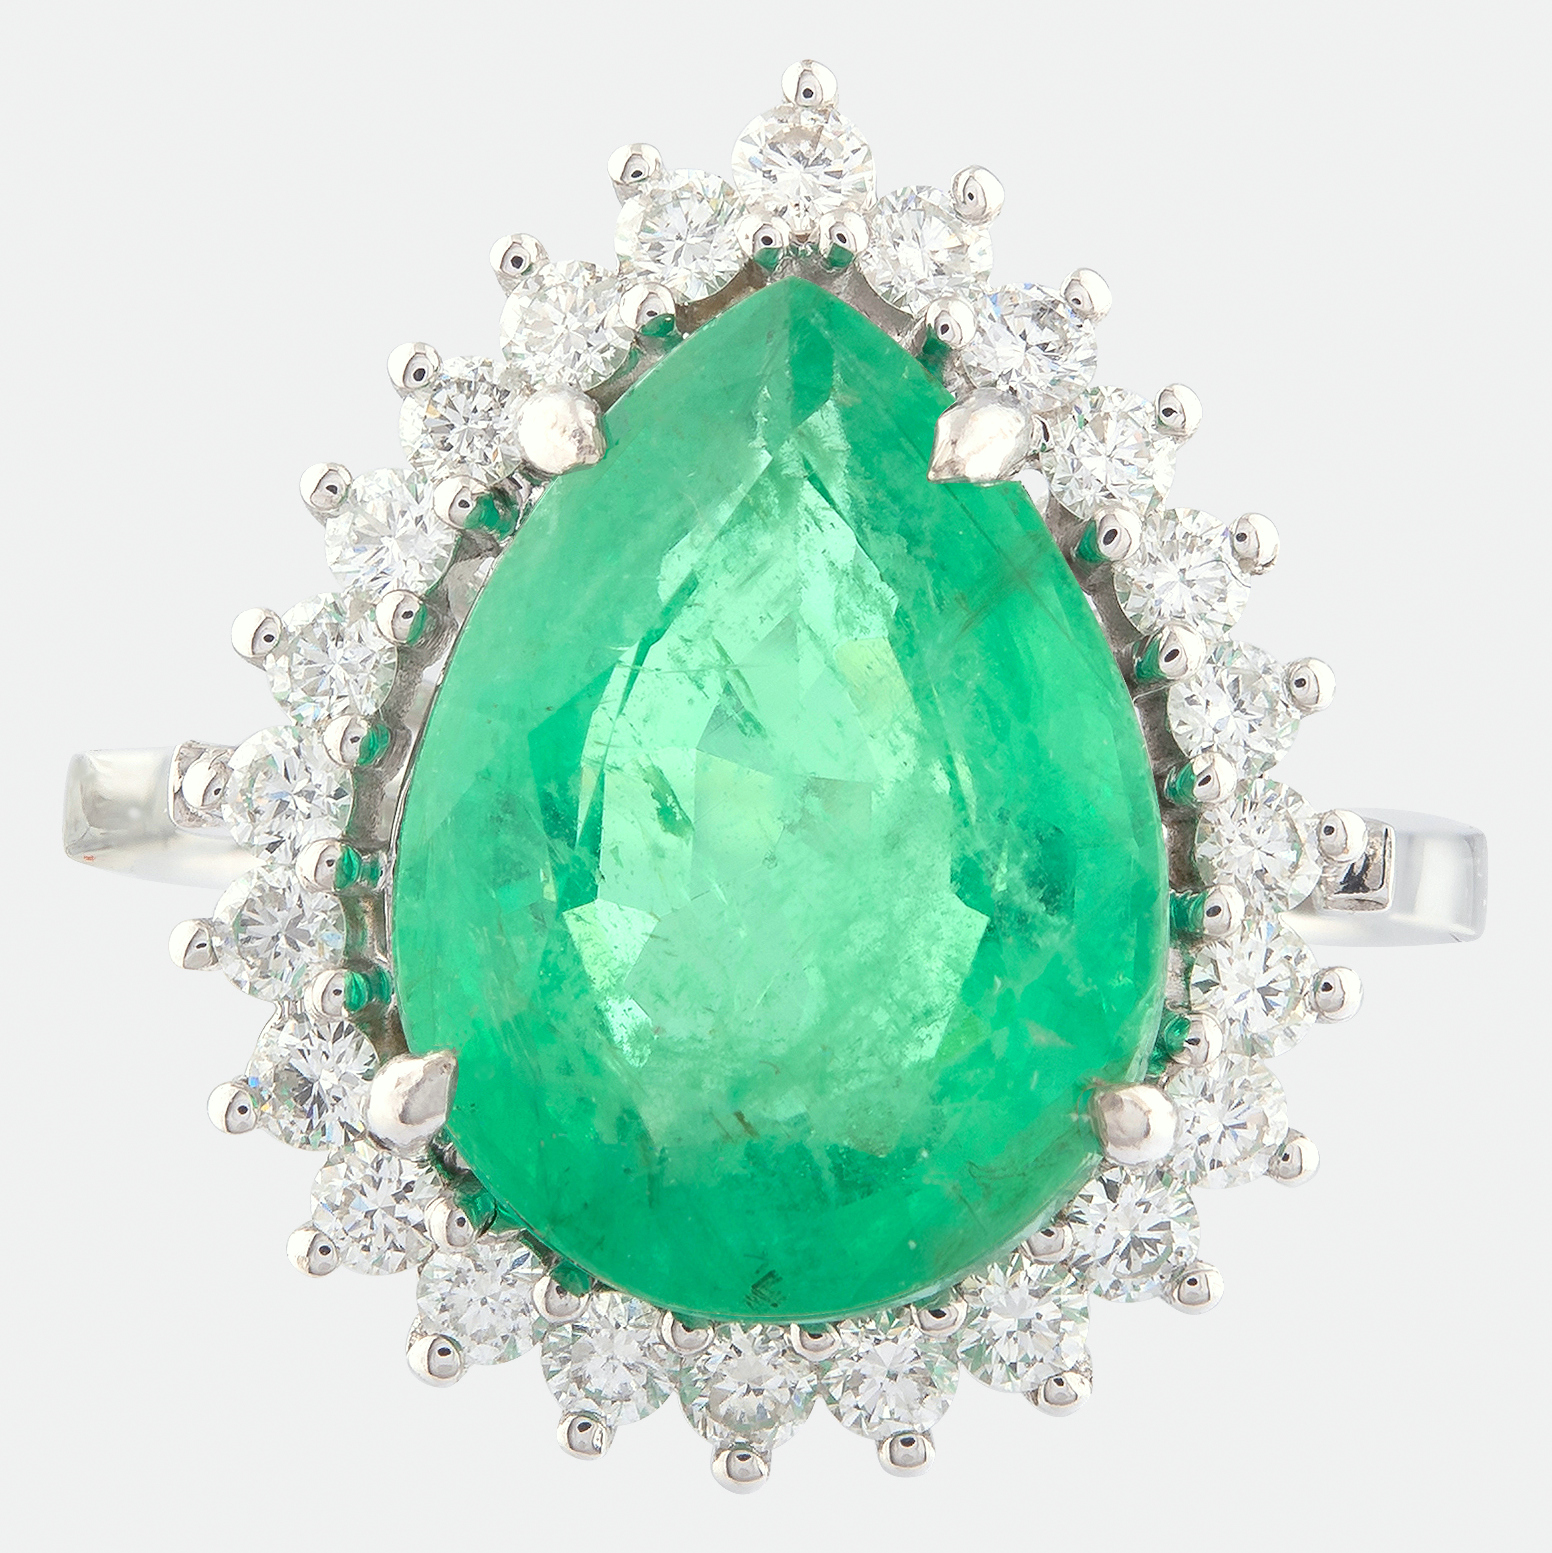 14K White Gold Cluster Ring - 4,75 ct Natural Emerald - 0,60 ct Diamond - Image 2 of 4